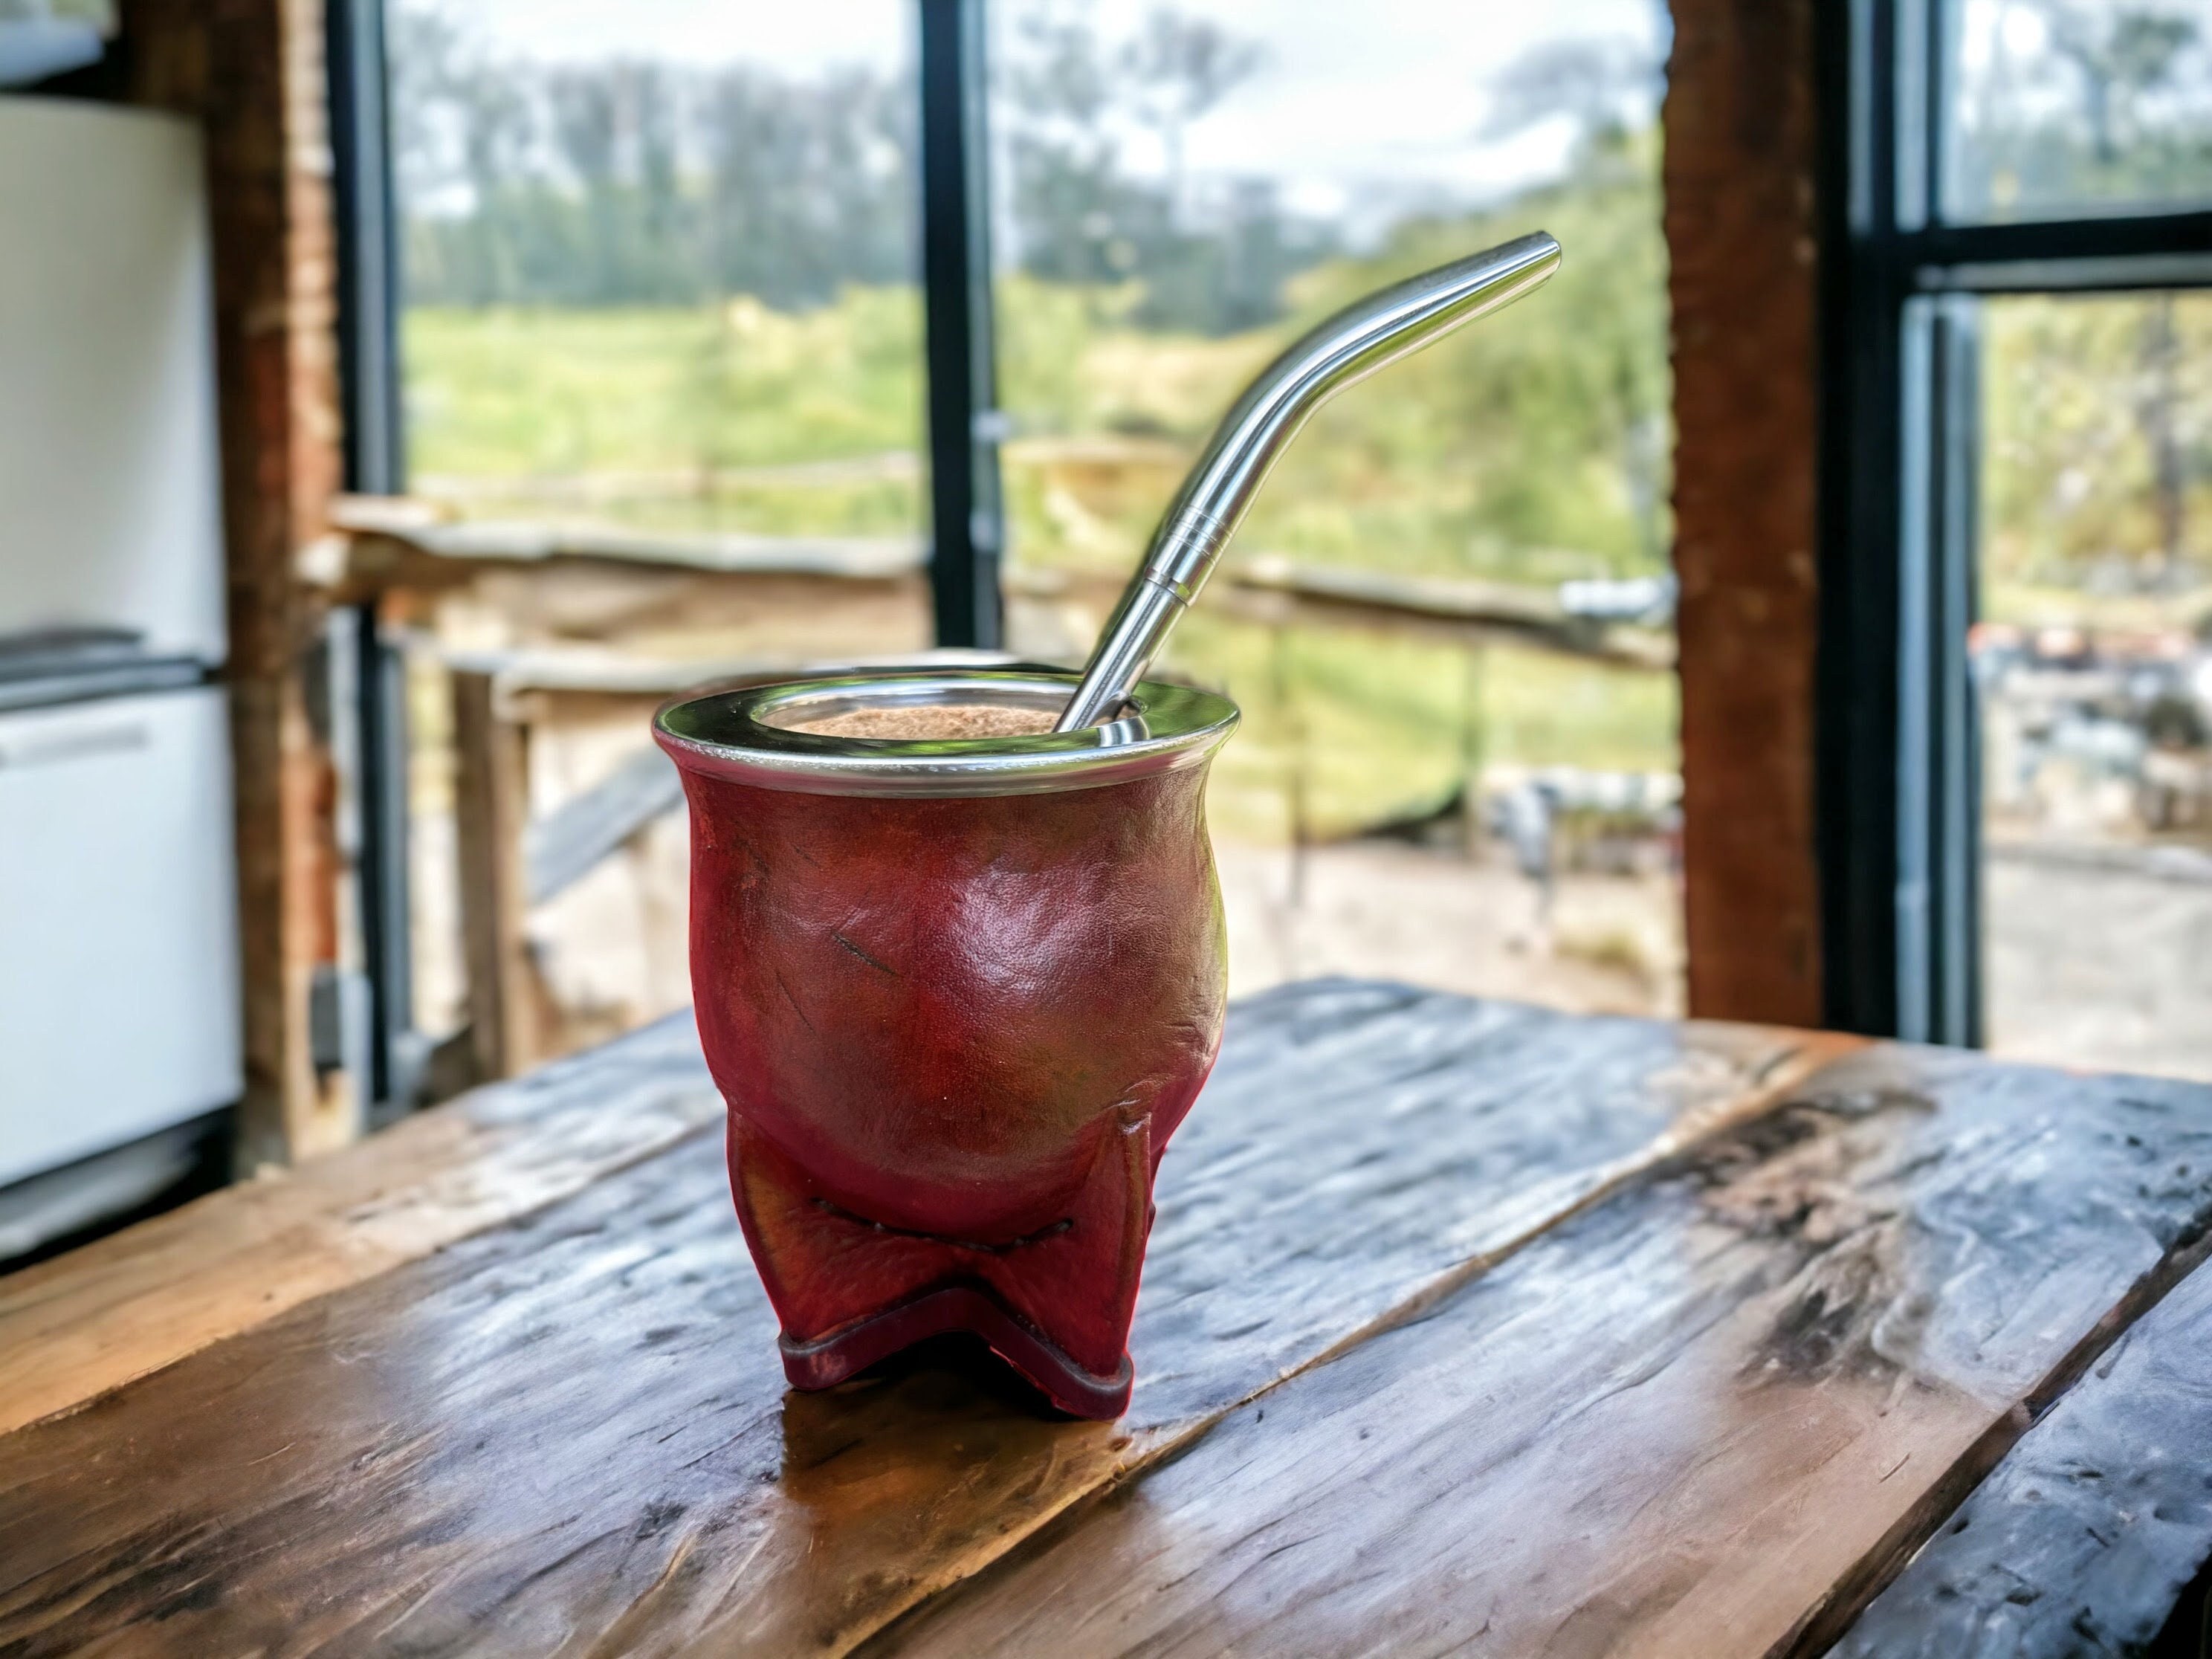 PREMIUM Handcrafted bombilla | Made in Argentina for yerba mate drinking |  18/8 stainless steel & bronze large mate straw | Removable spoon style